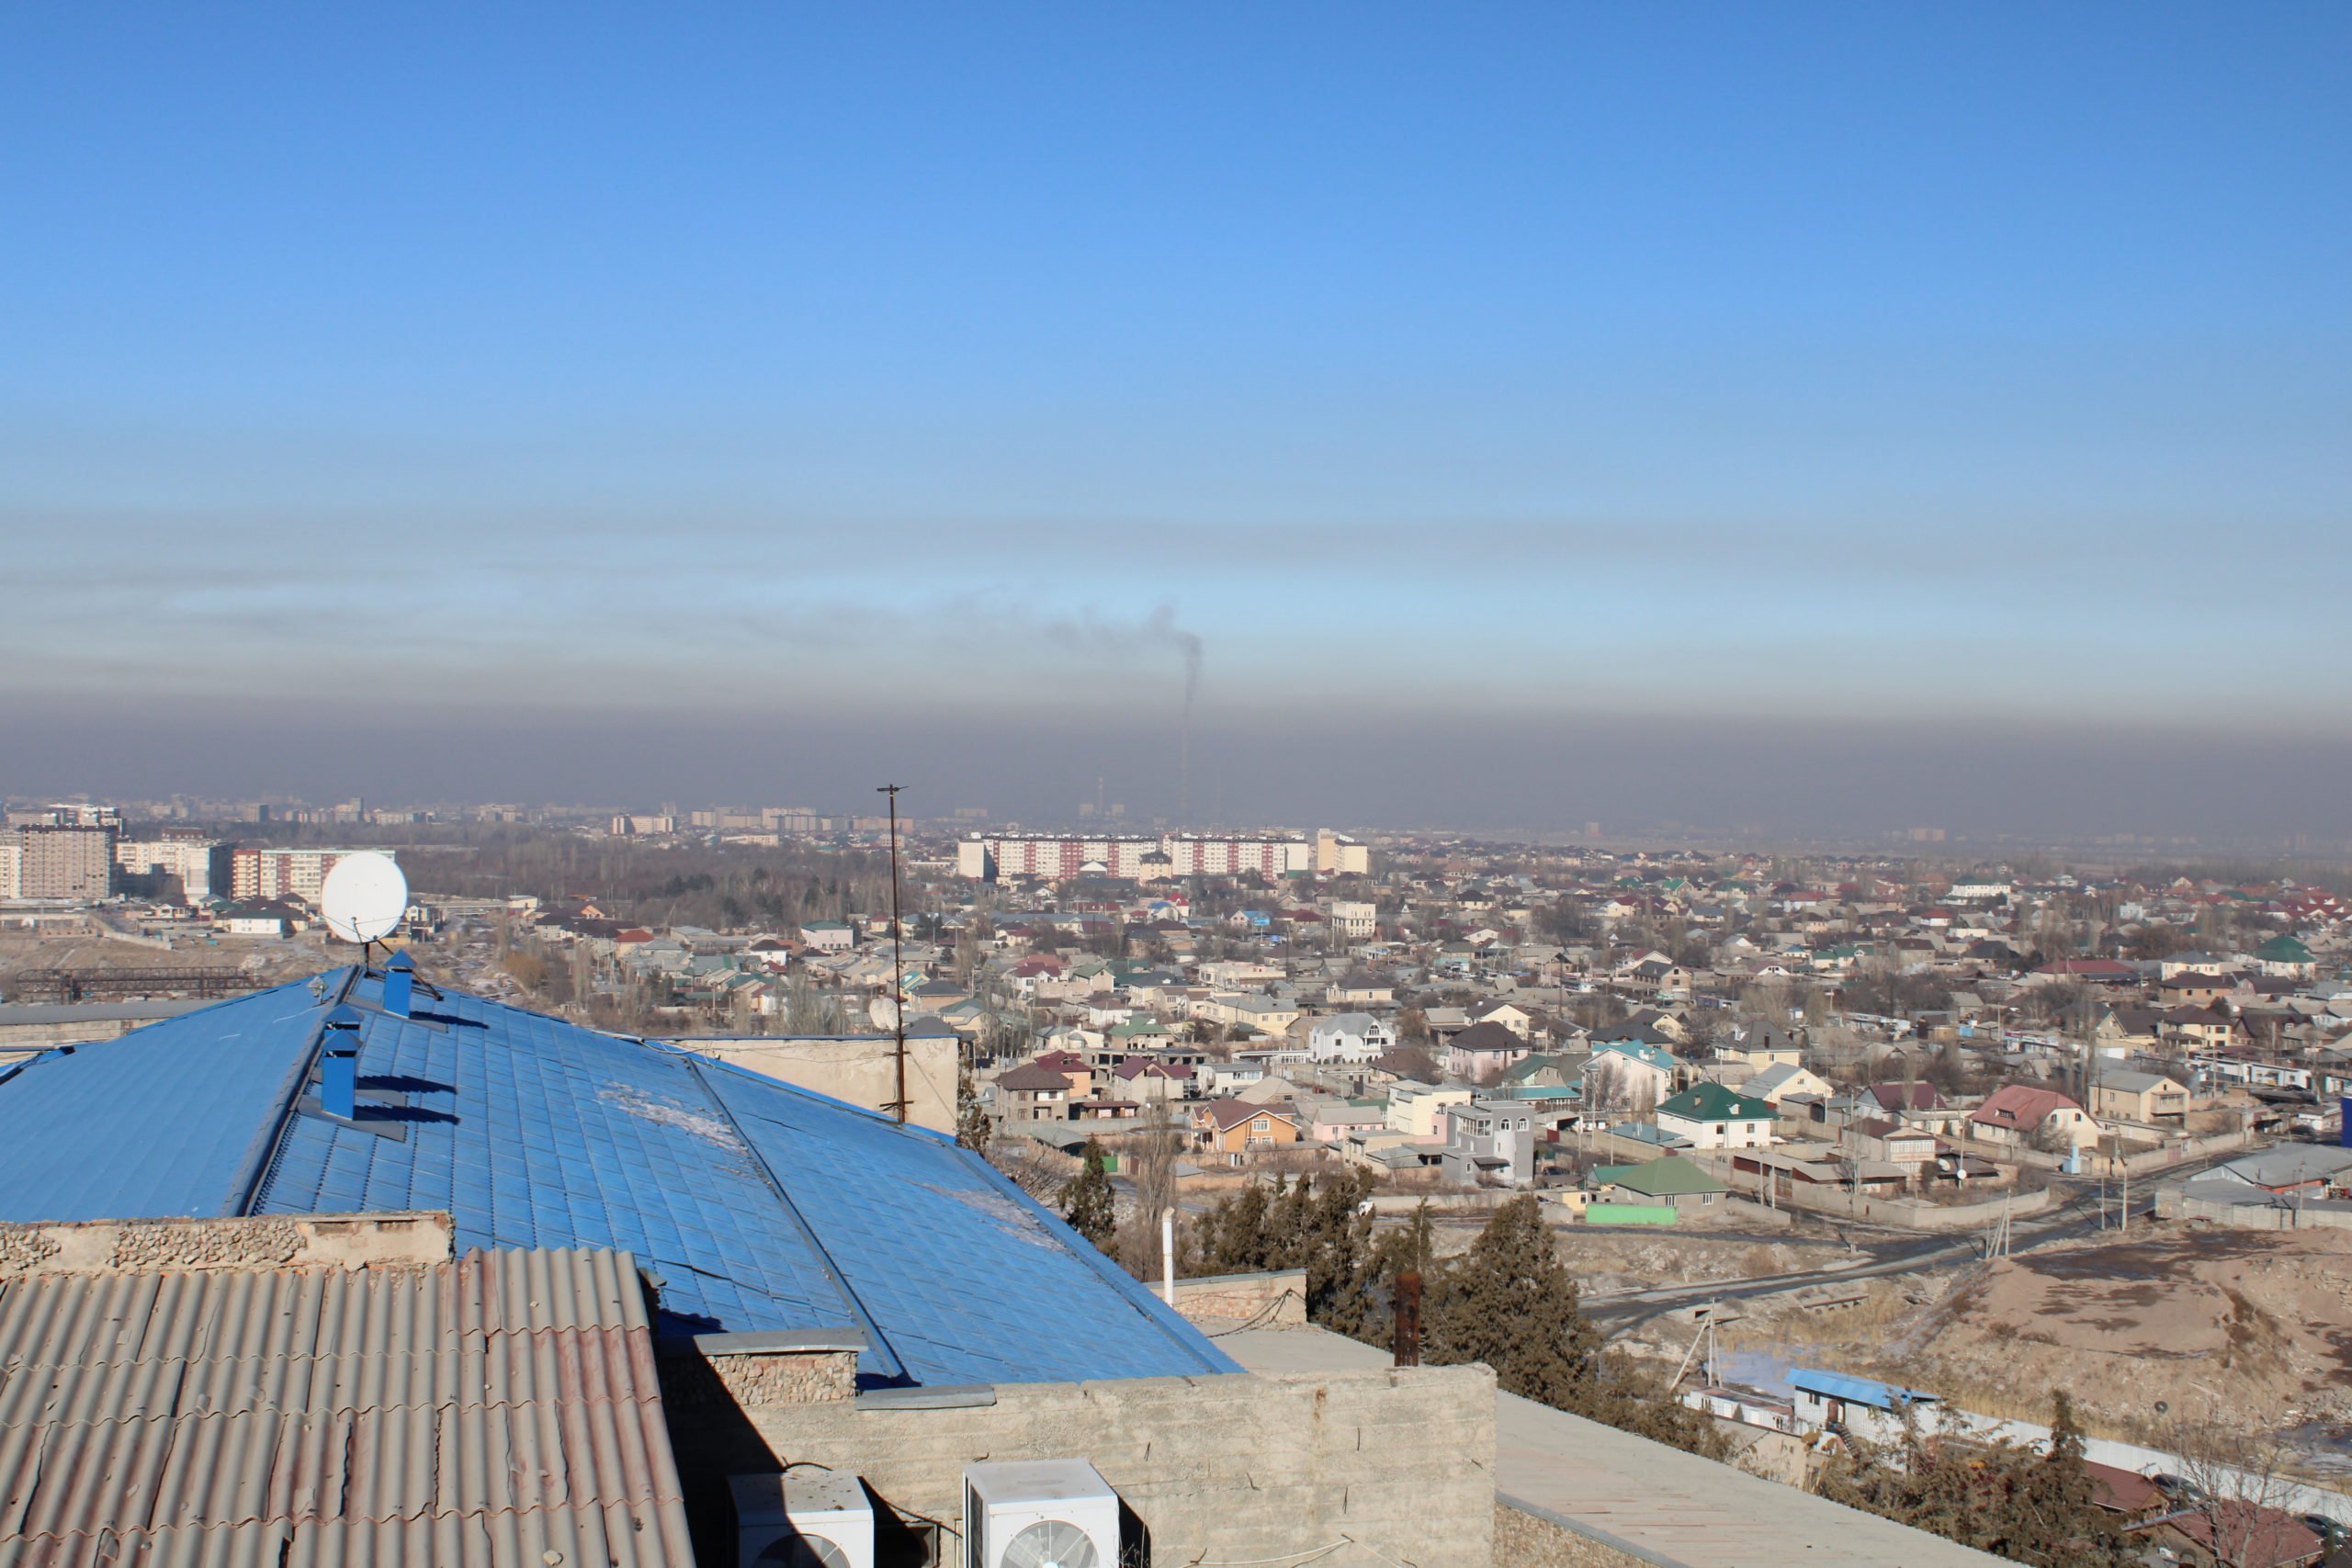 Bishkek pollution on 11 January, 2021, where pollution levels surpassed South Asia’s usual worst offenders such as Delhi and Dhaka in January